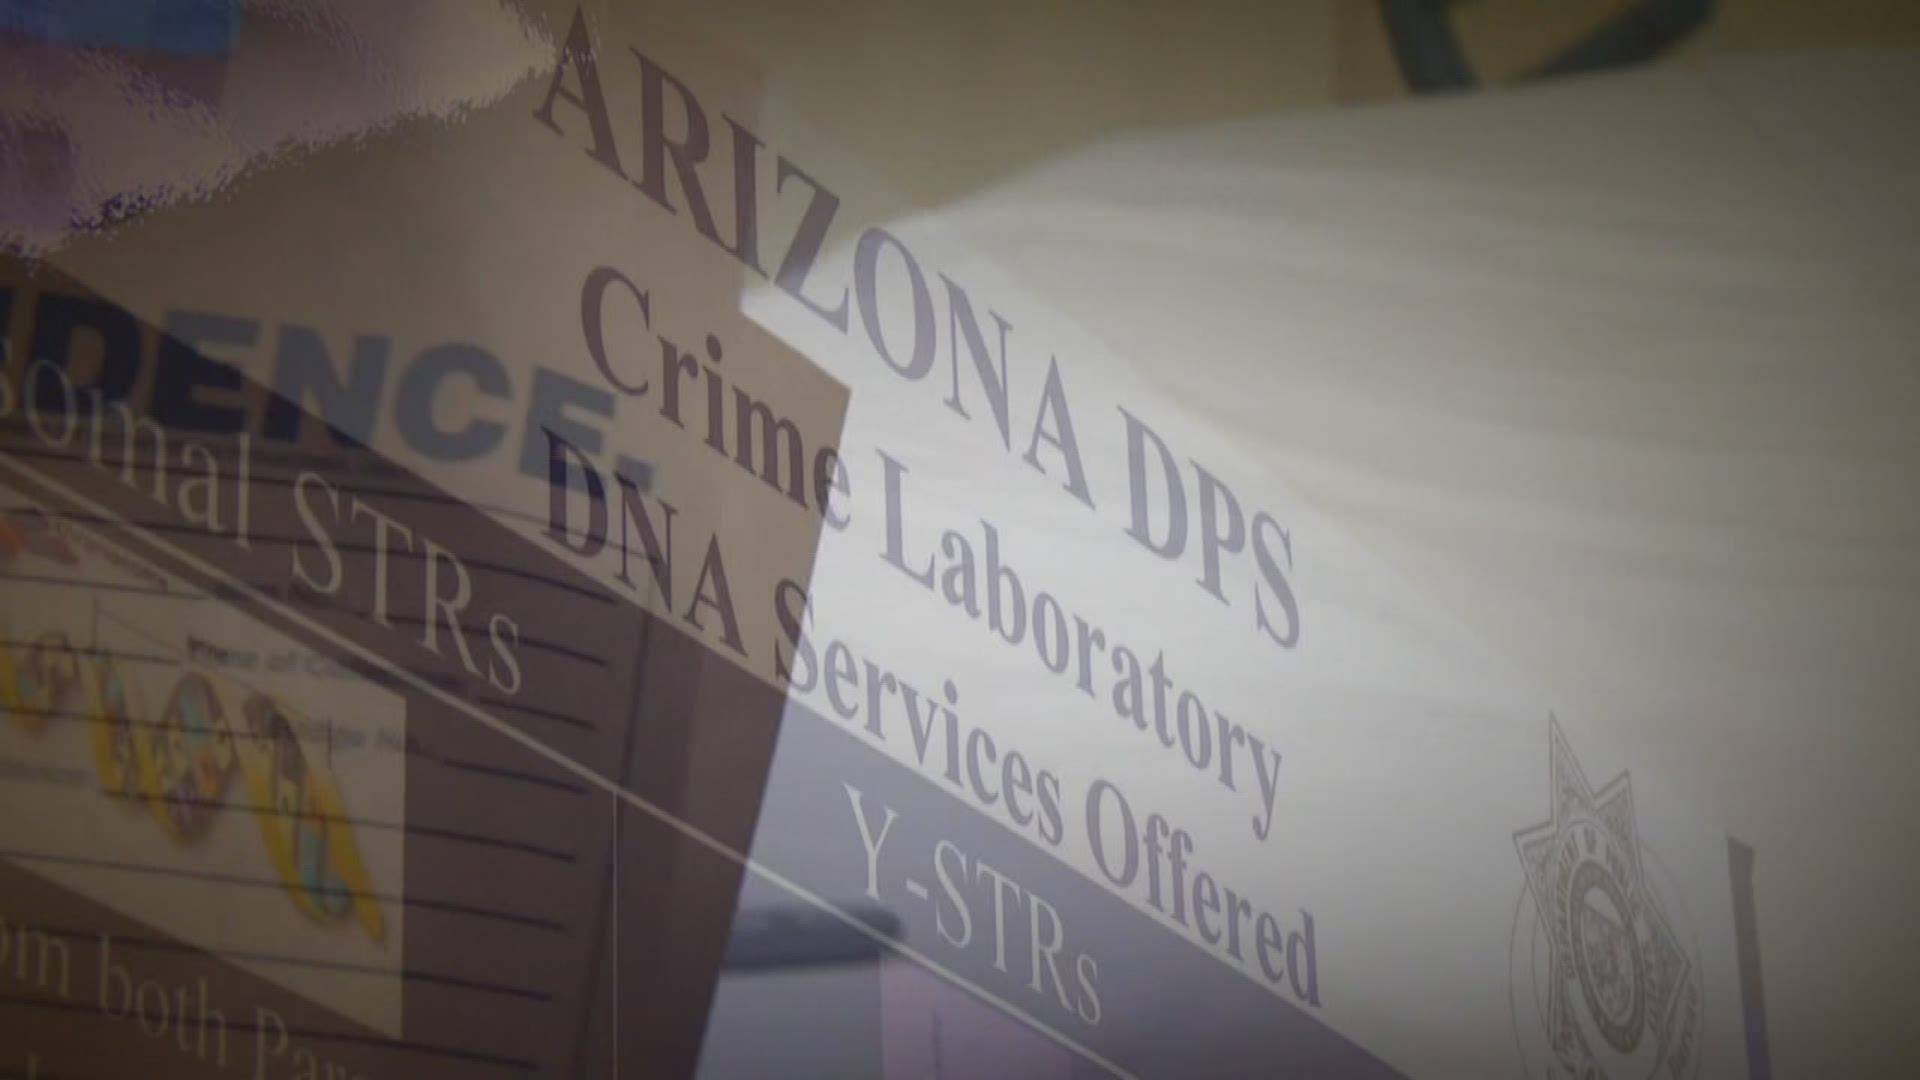 A forensic scientist at the state crime lab intentionally hid her backlog of cases for years, failed to test DNA submitted in 40 cases, and kept evidence from those cases in her possession, according to a DPS audit.